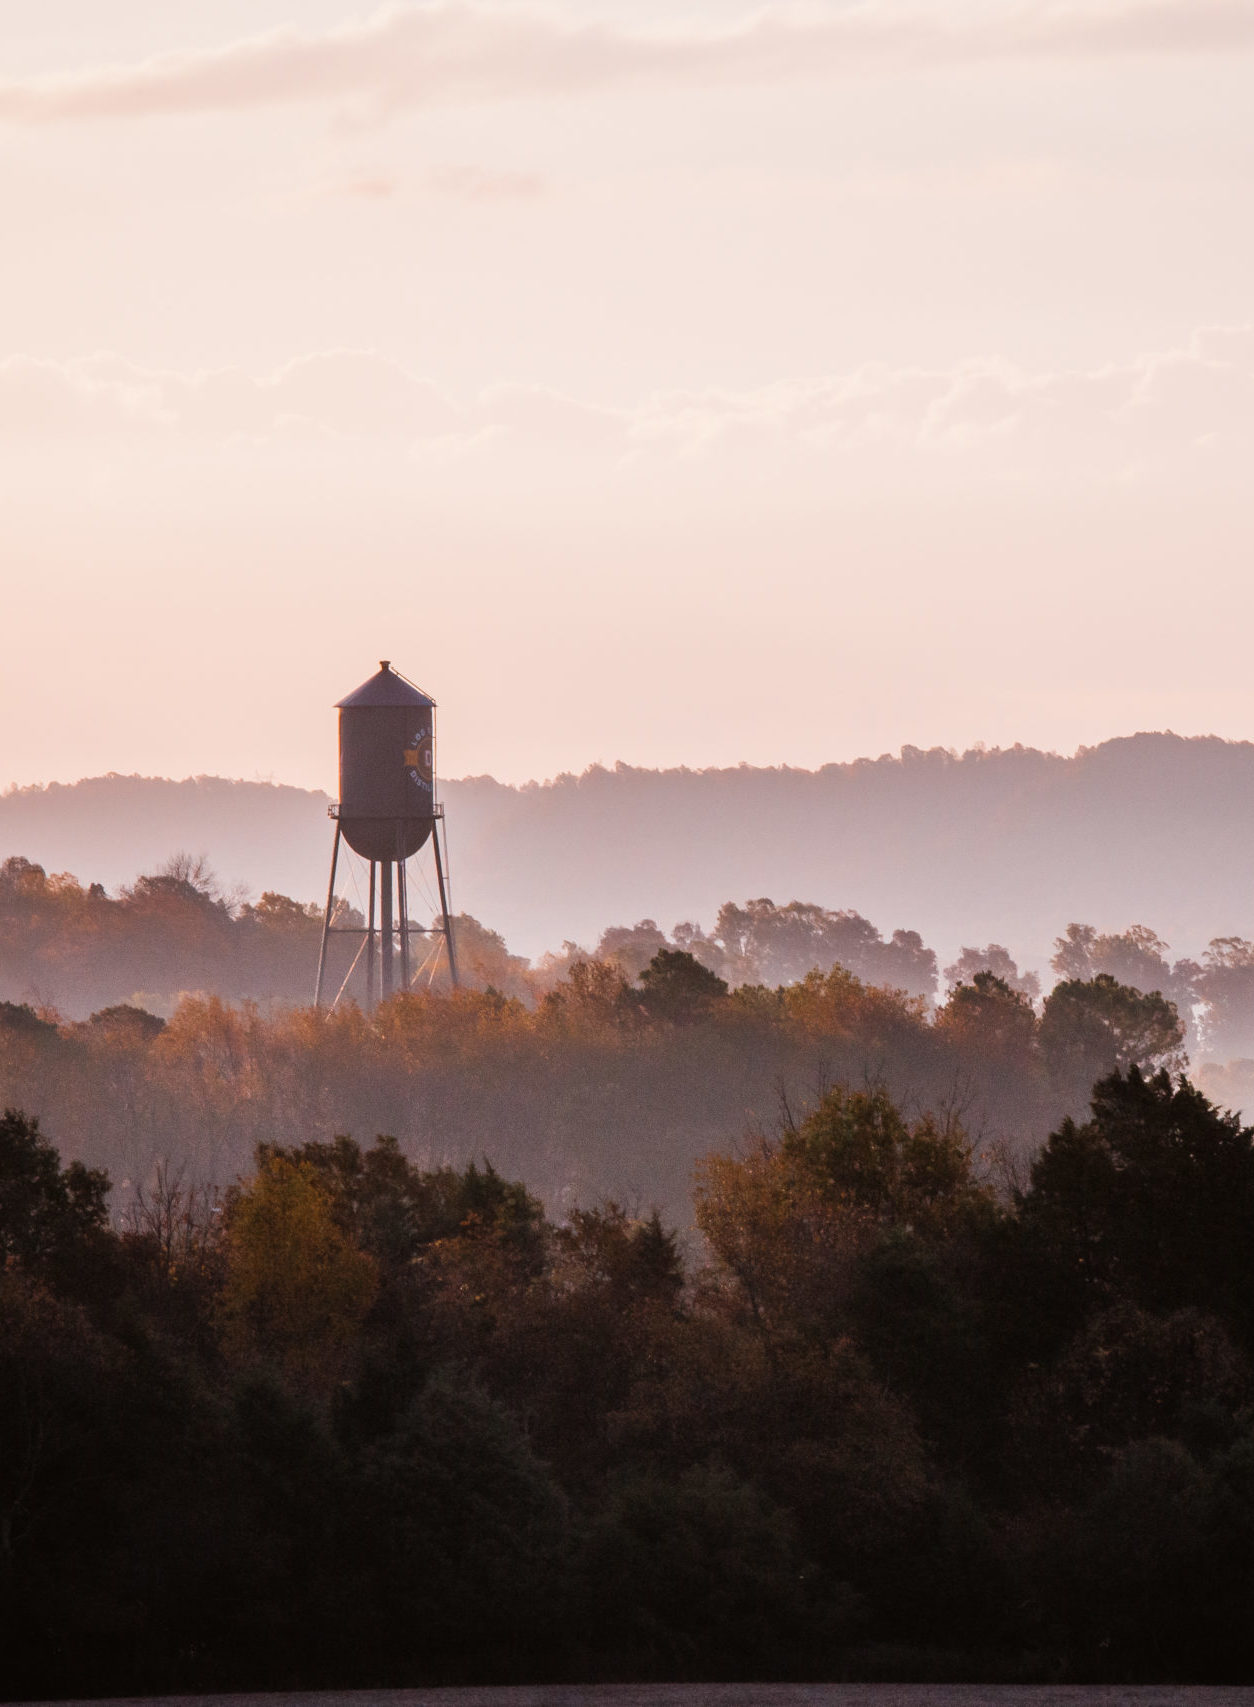 View of Log Still Distillery water tower rising above the landscape.